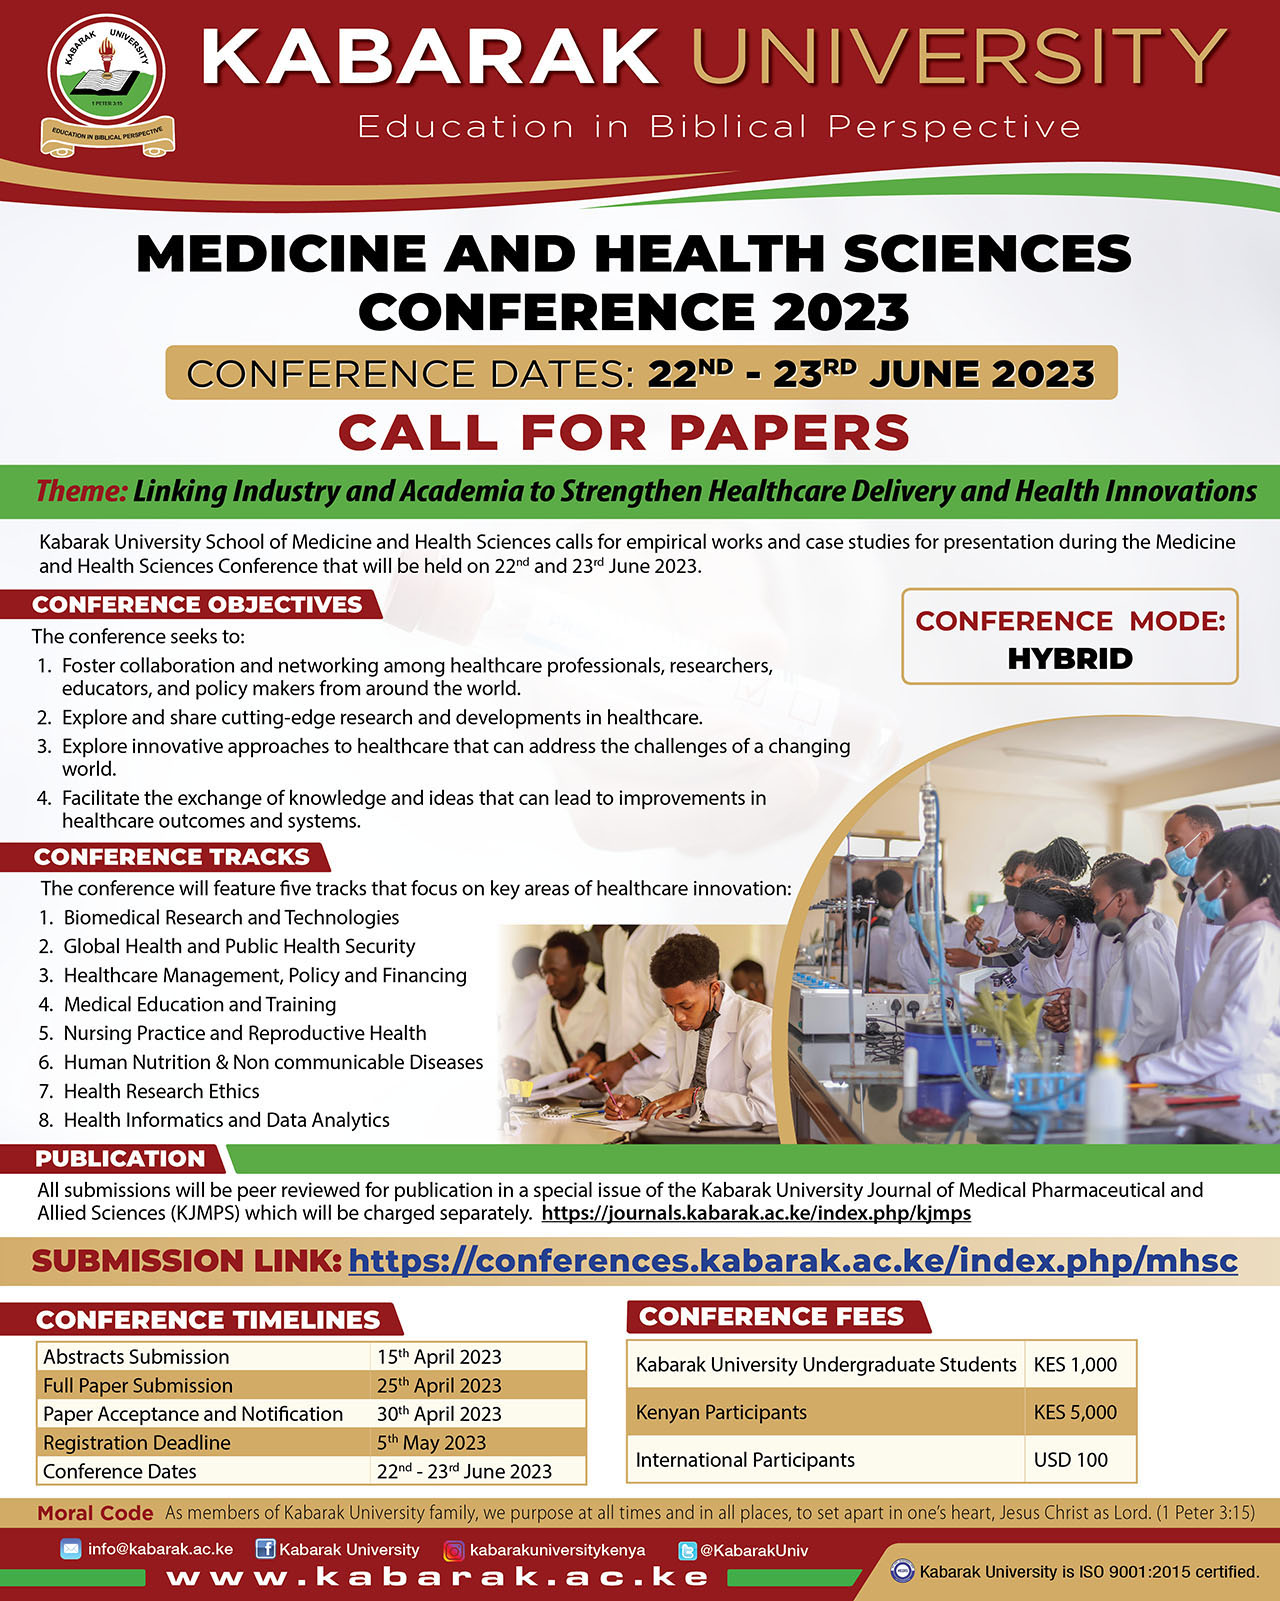 					View 2023: Medicine and Health Sciences Conference
				